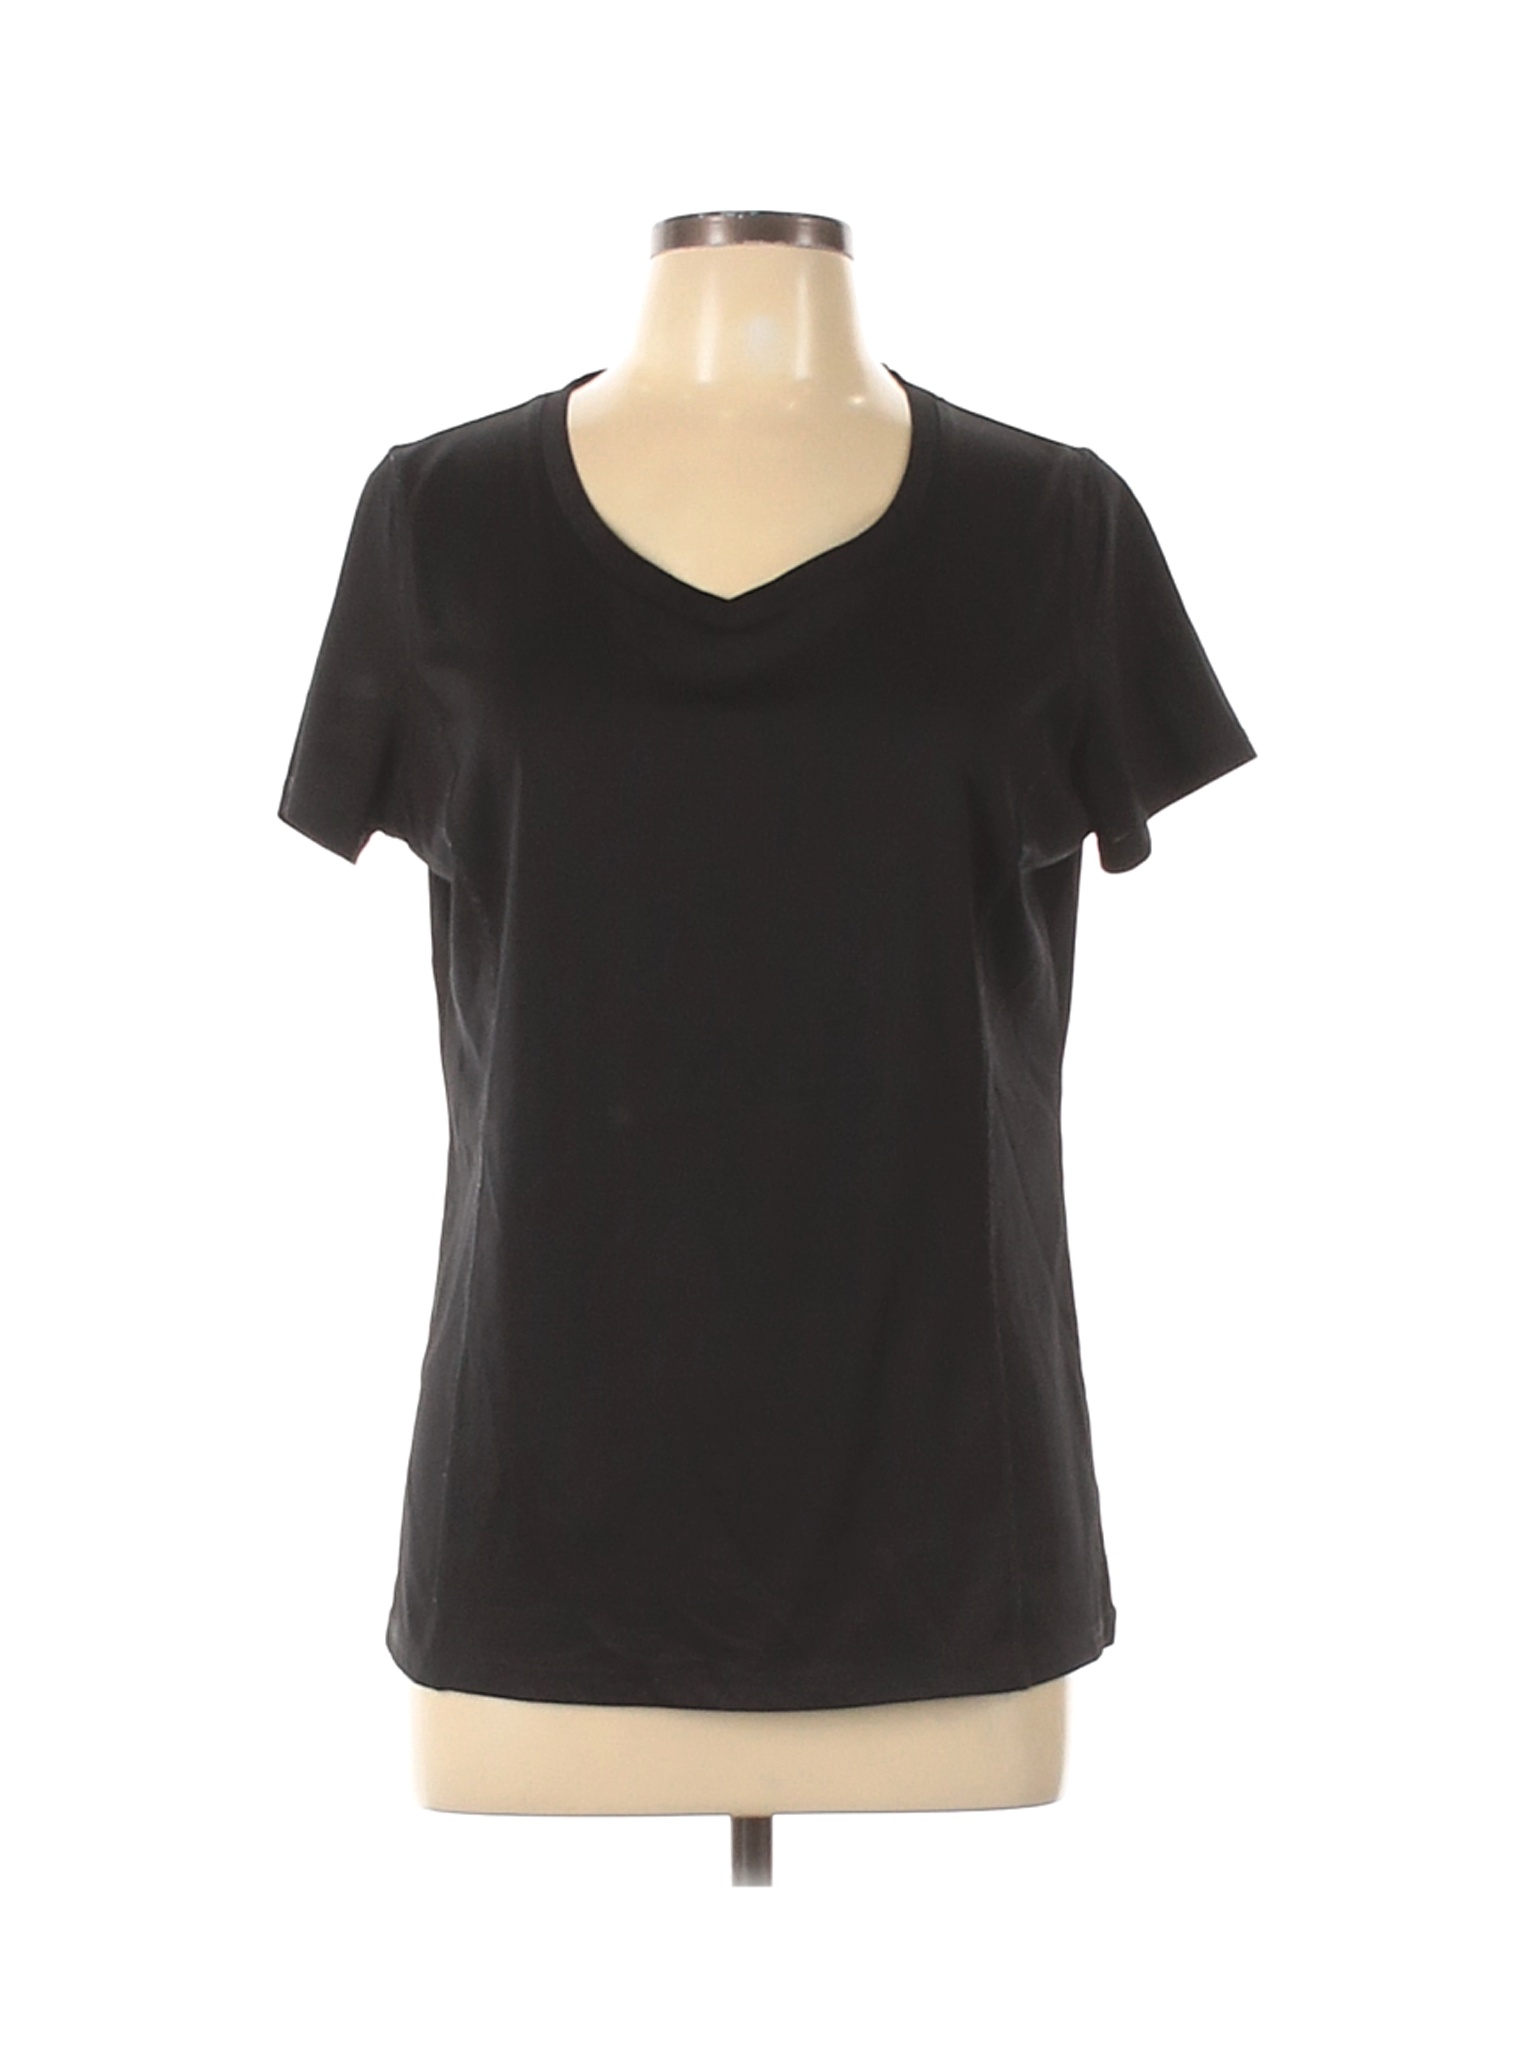 Made for Life Women Black Active T-Shirt L | eBay